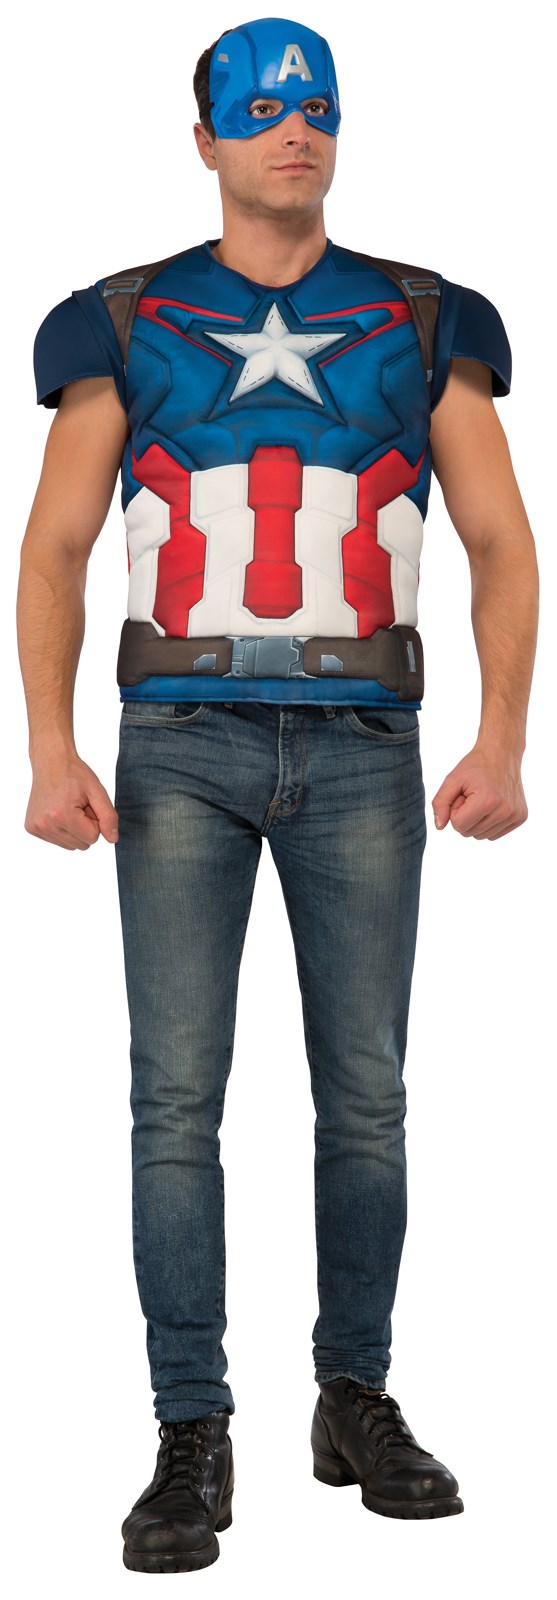 Captain America The Winter Soldier Retro Muscle Shirt Costume Kit Adult